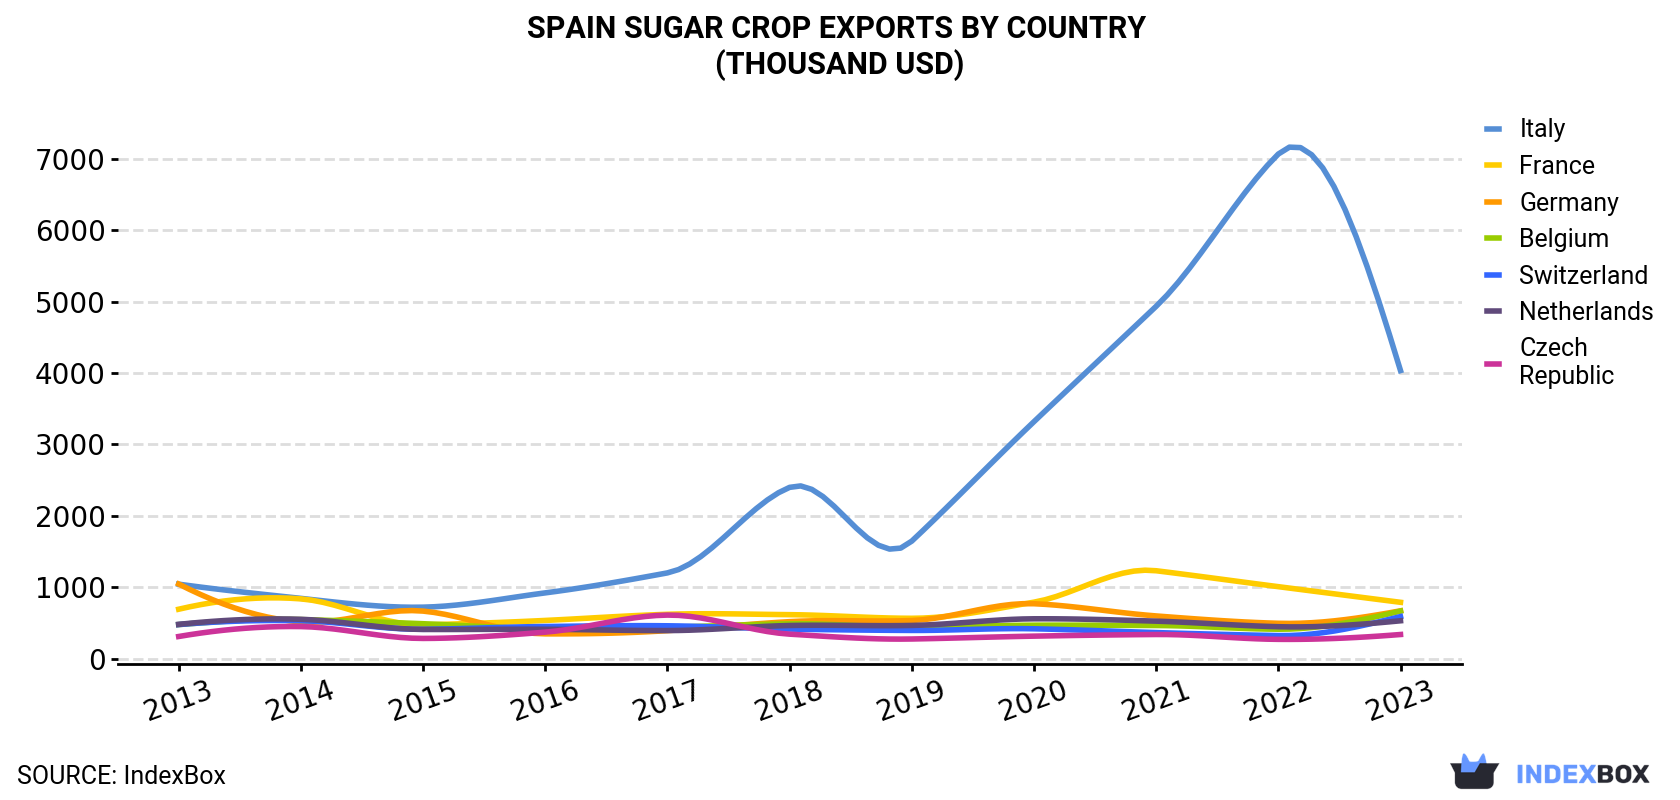 Spain Sugar Crop Exports By Country (Thousand USD)